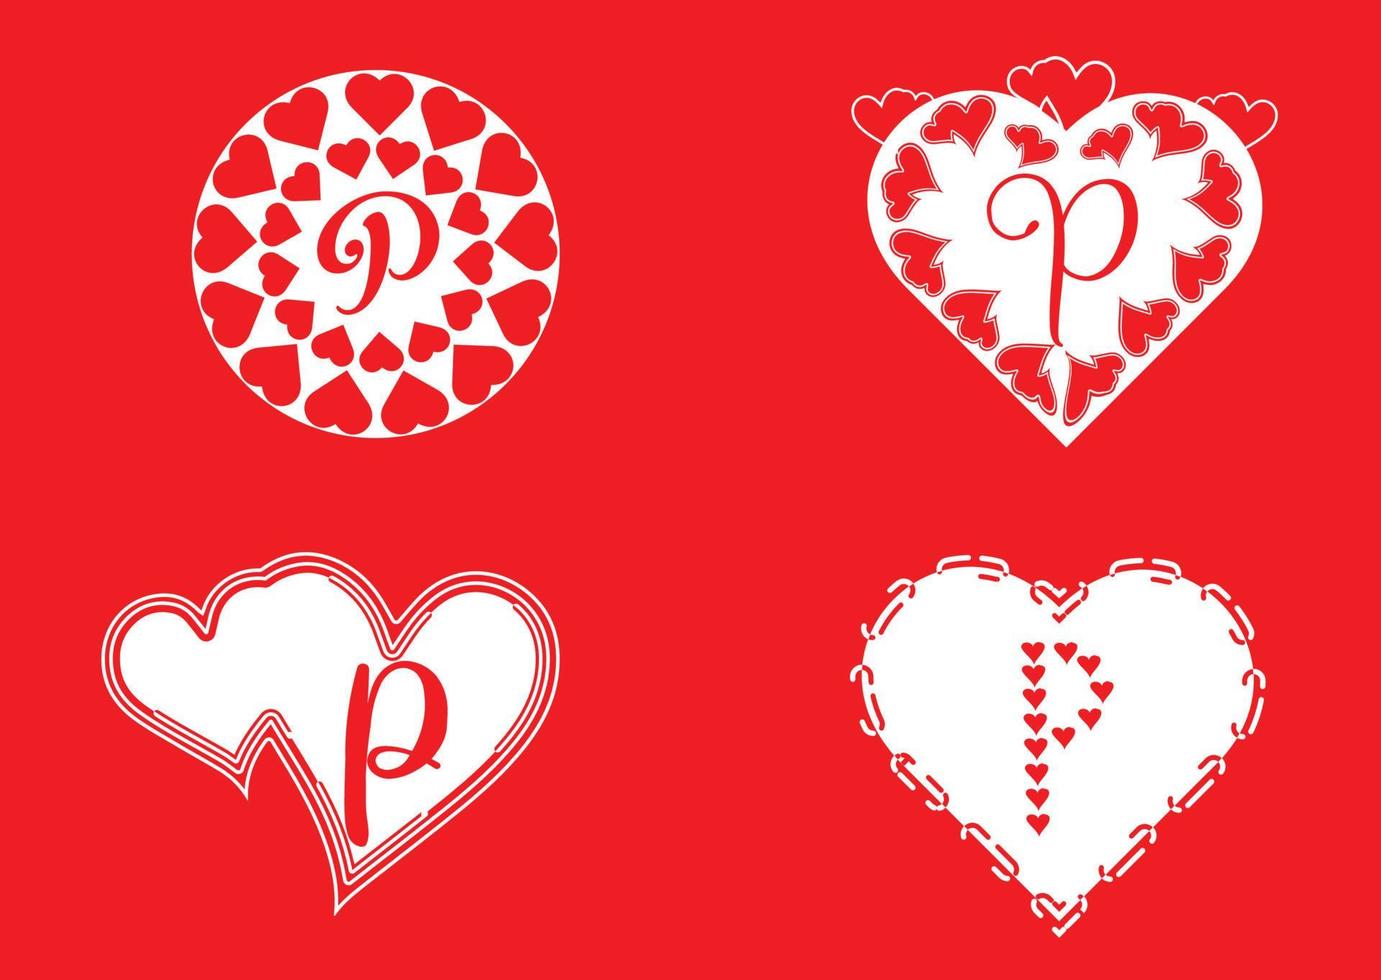 P letter logo with love icon, valentines day design template vector